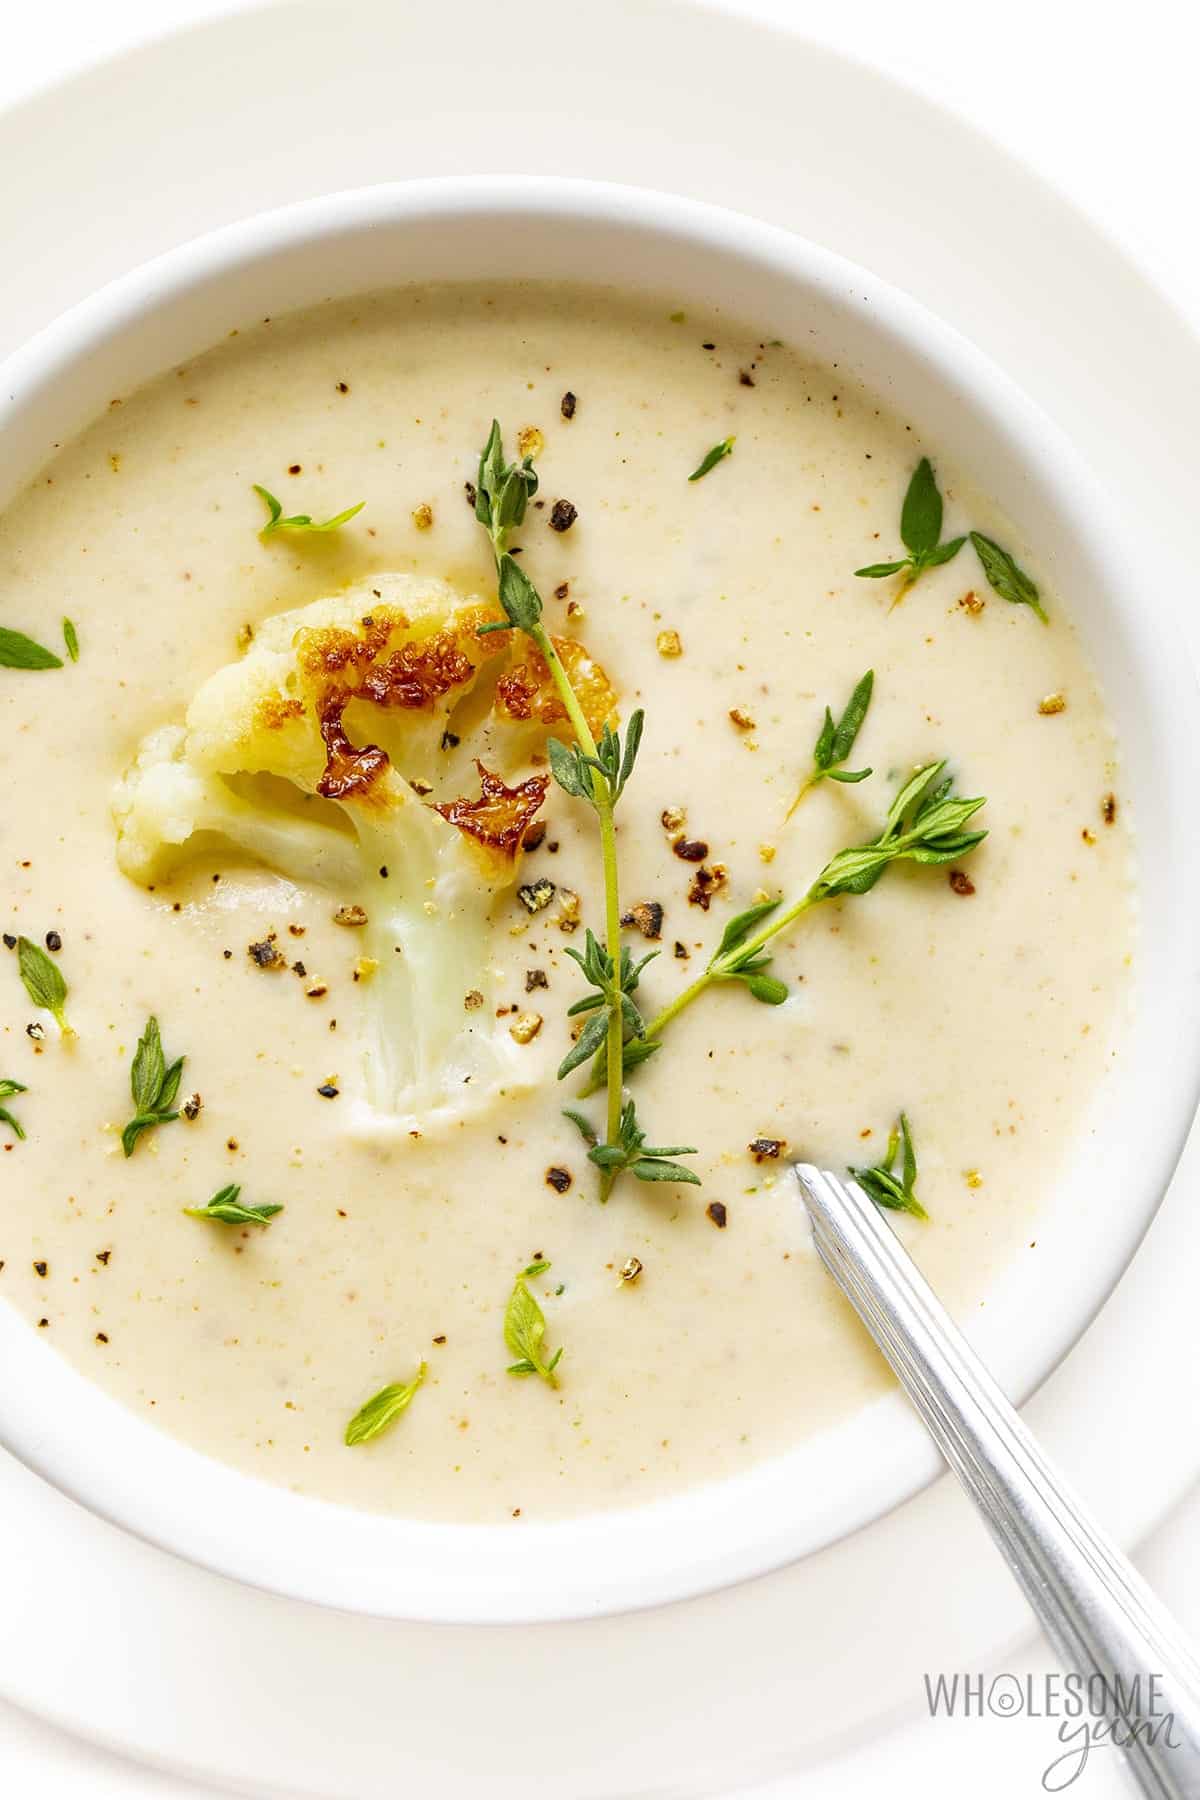 Serve roasted cauliflower soup in bowls, spoon and garnish.